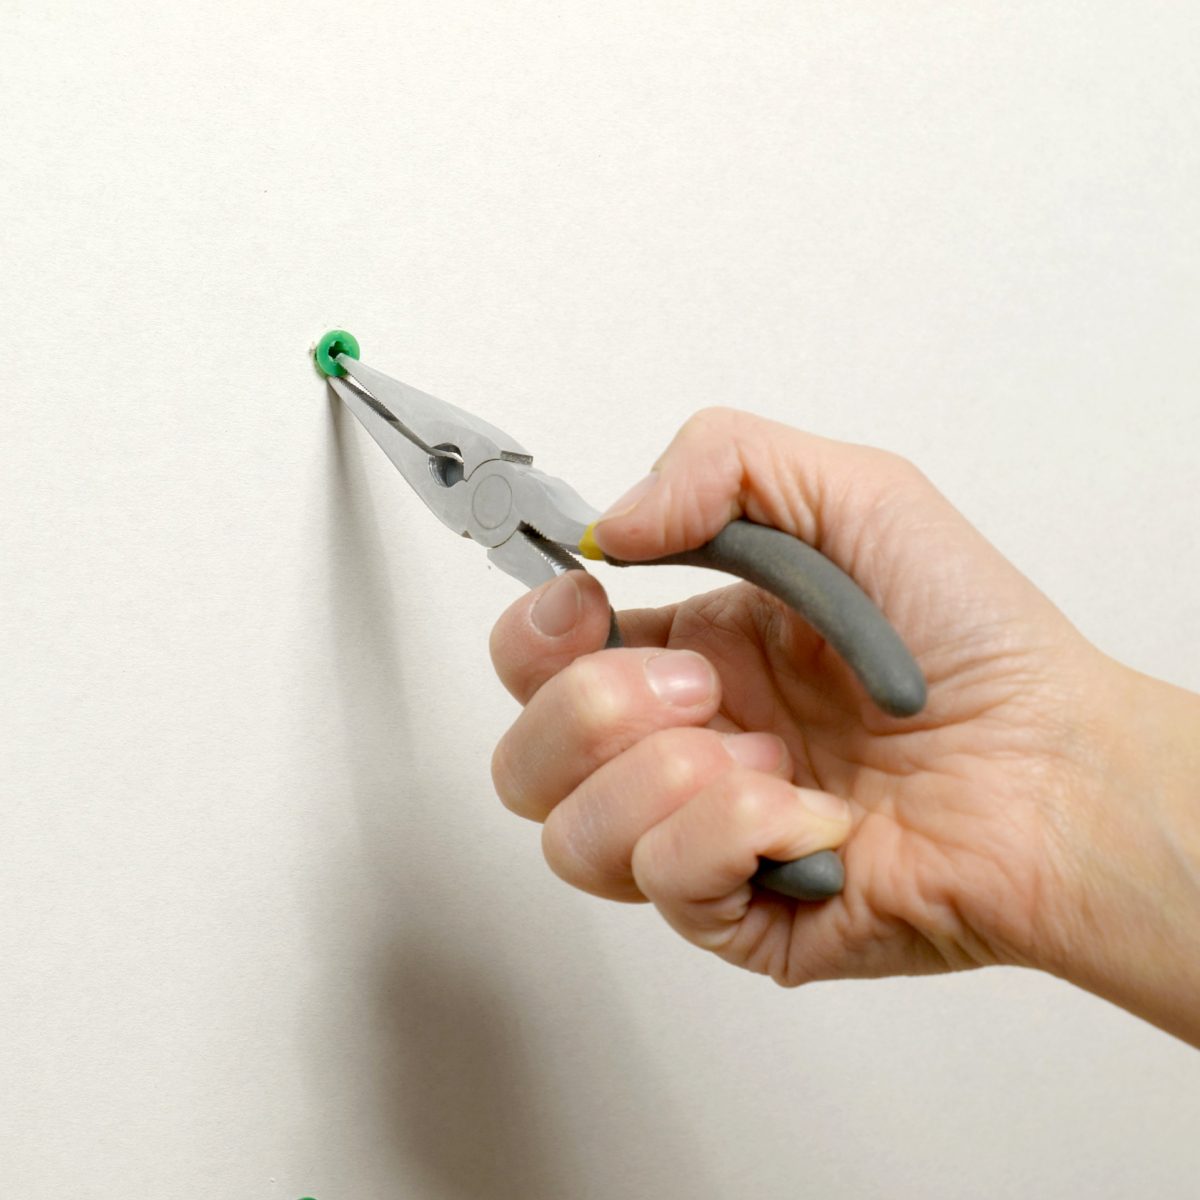 How To Remove Drywall Anchors